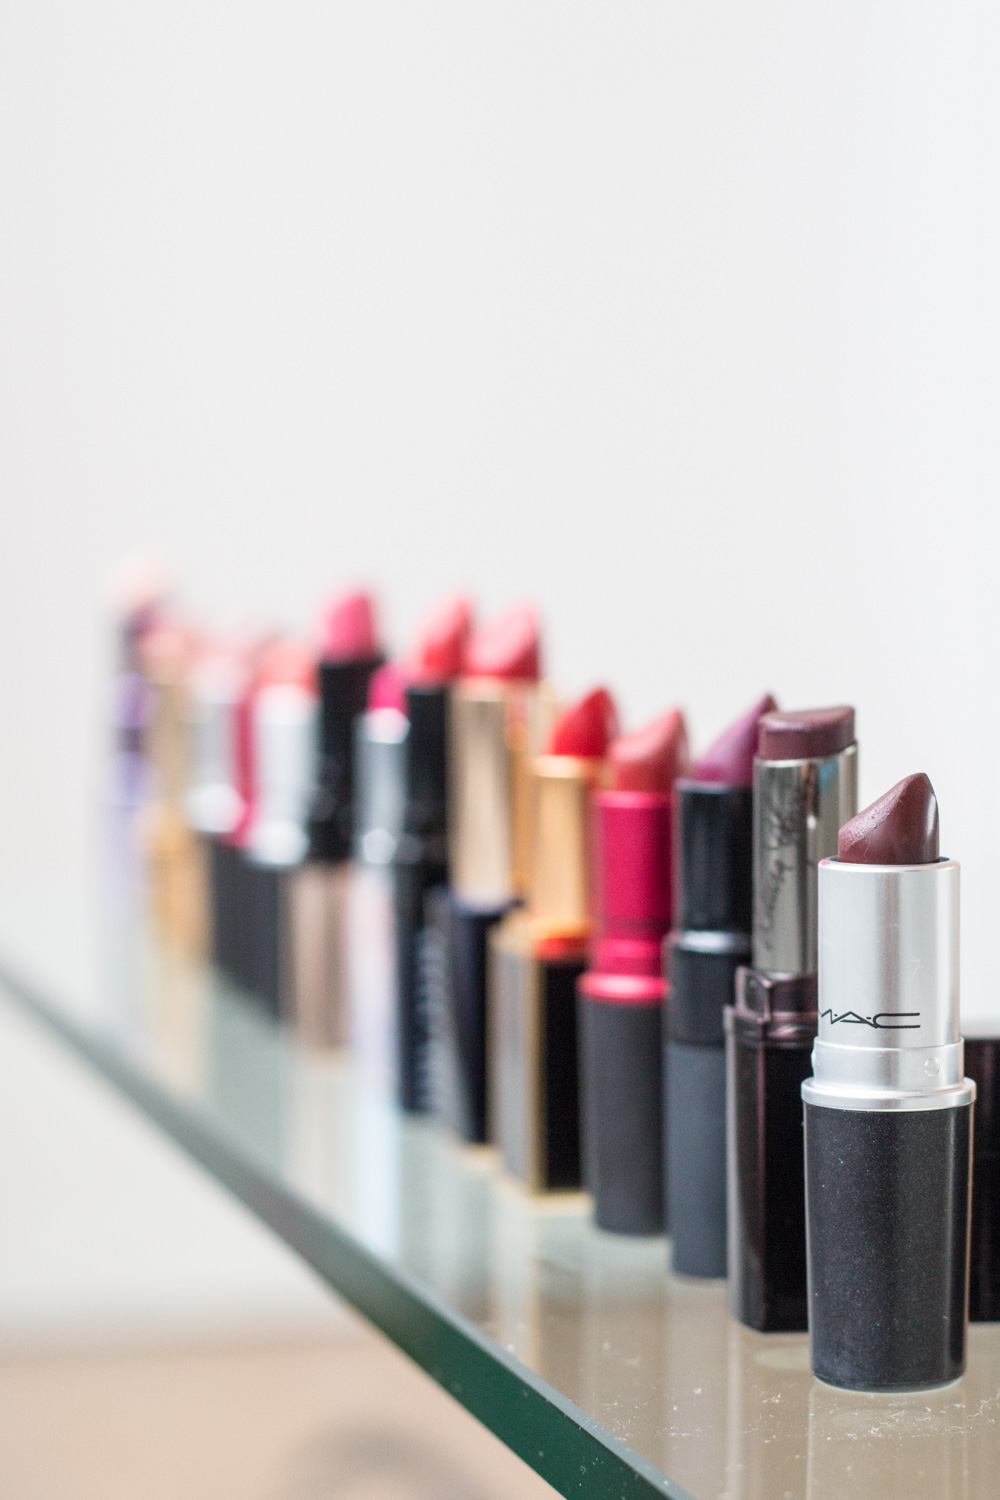 Lipstick Guide: 15 Shades For Every Occasion